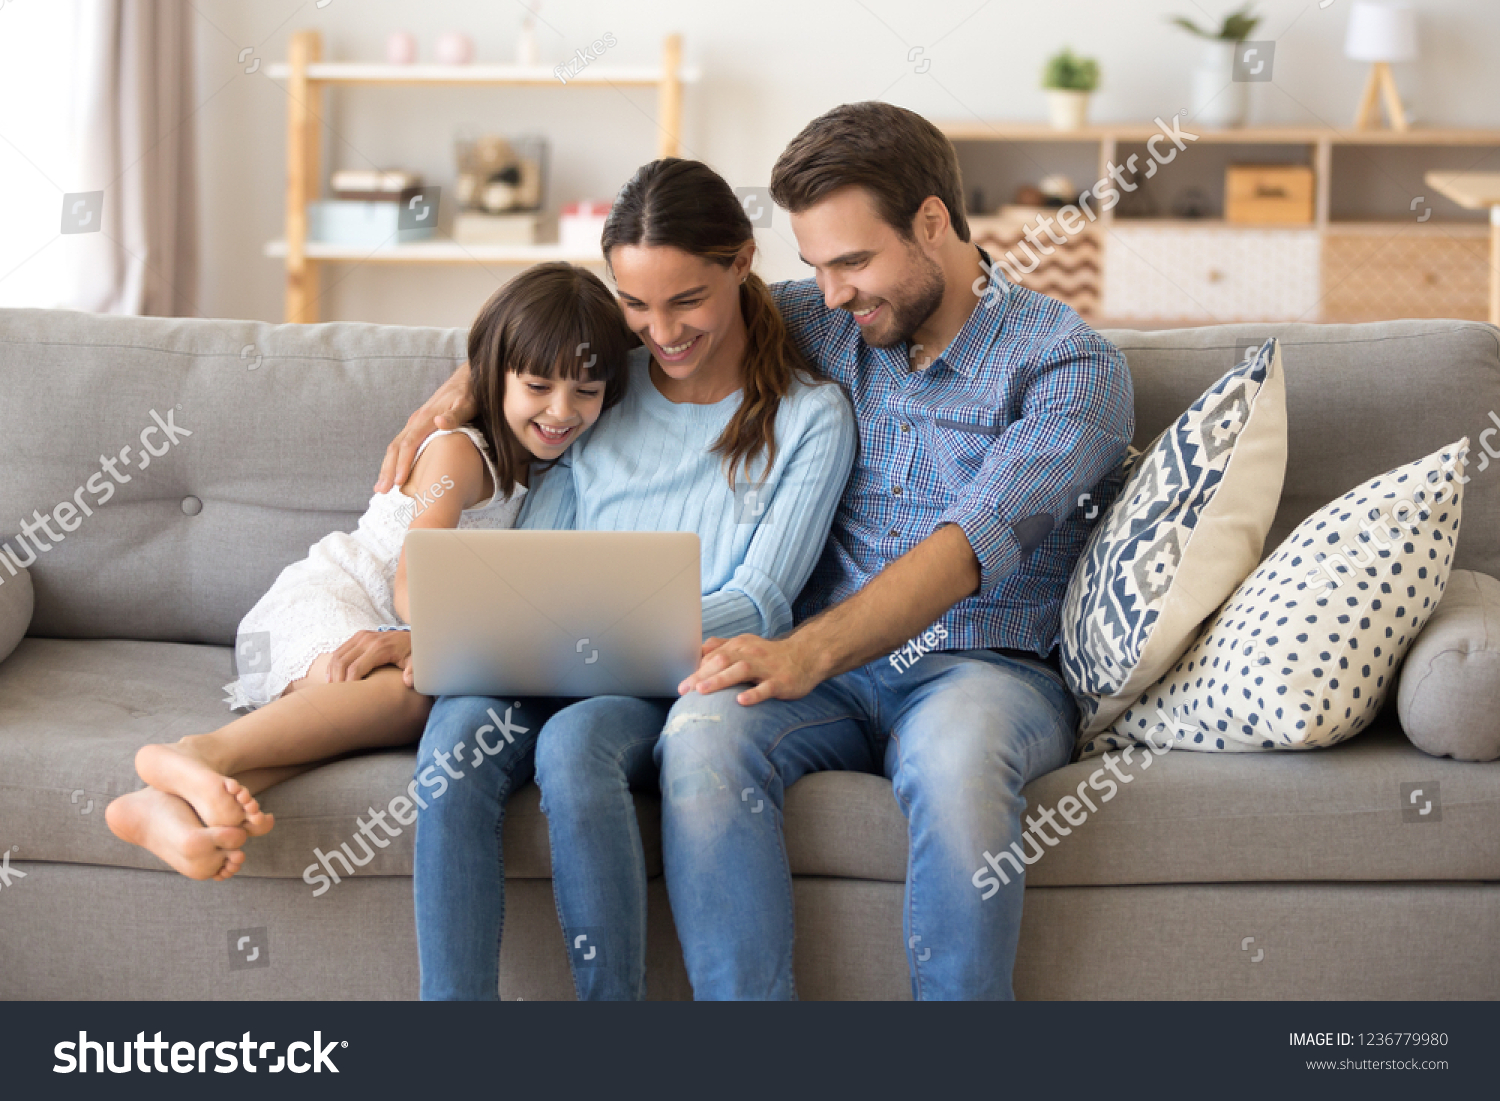 Married diverse couple and little preschool daughter sitting on couch using computer watching movie cartoons online surfing internet shopping purchasing via internet spending weekend together at home #1236779980